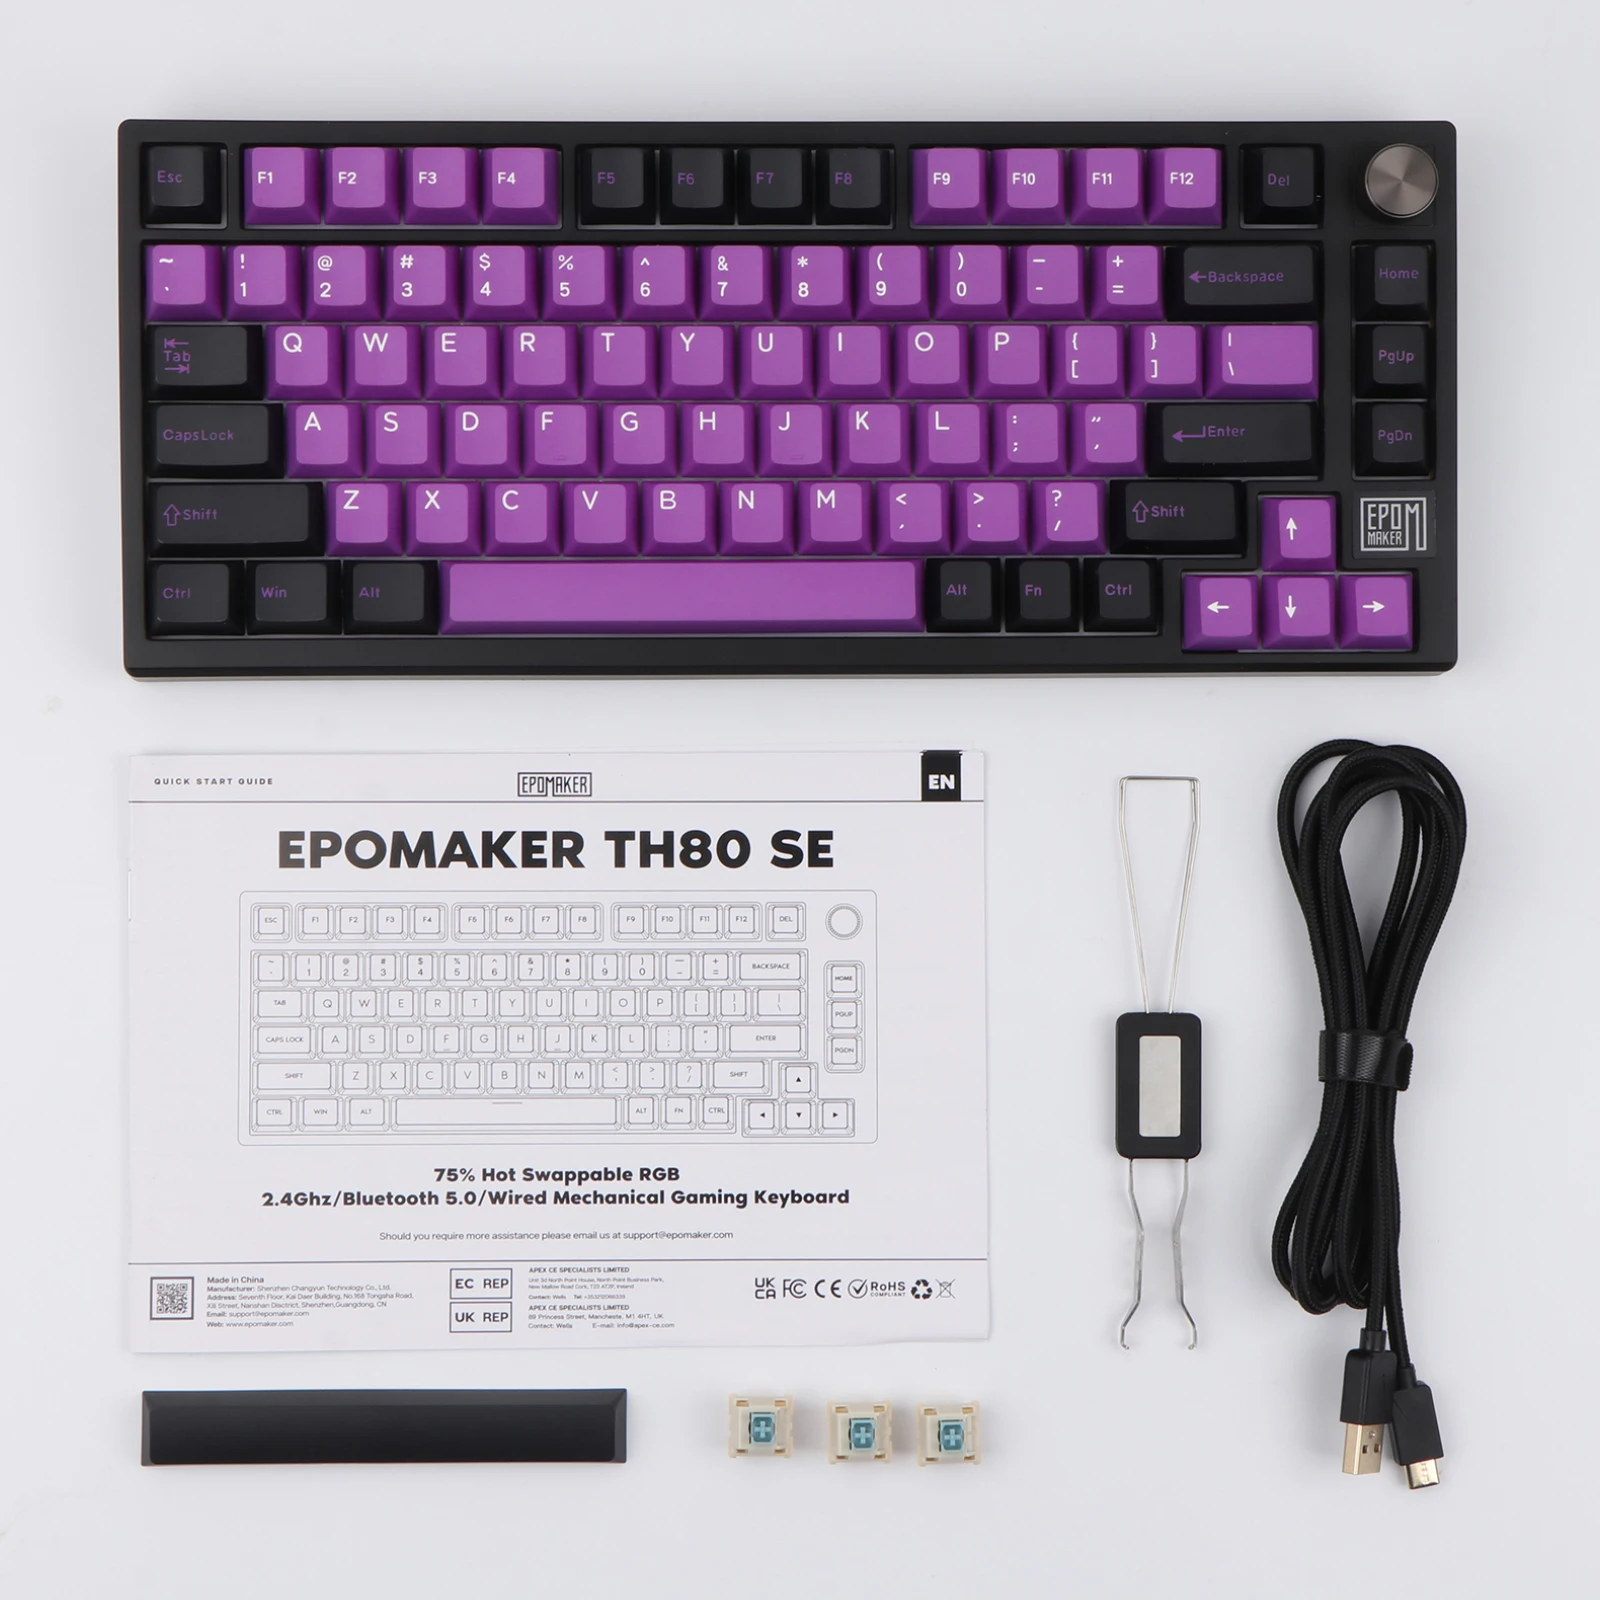 EPOMAKER TH80 SE Gasket 75% Mechanical Keyboard NKRO Hot Swappable North-facing RGB 2.4Ghz/Bluetooth 5.0/Wired Keyboard images - 6